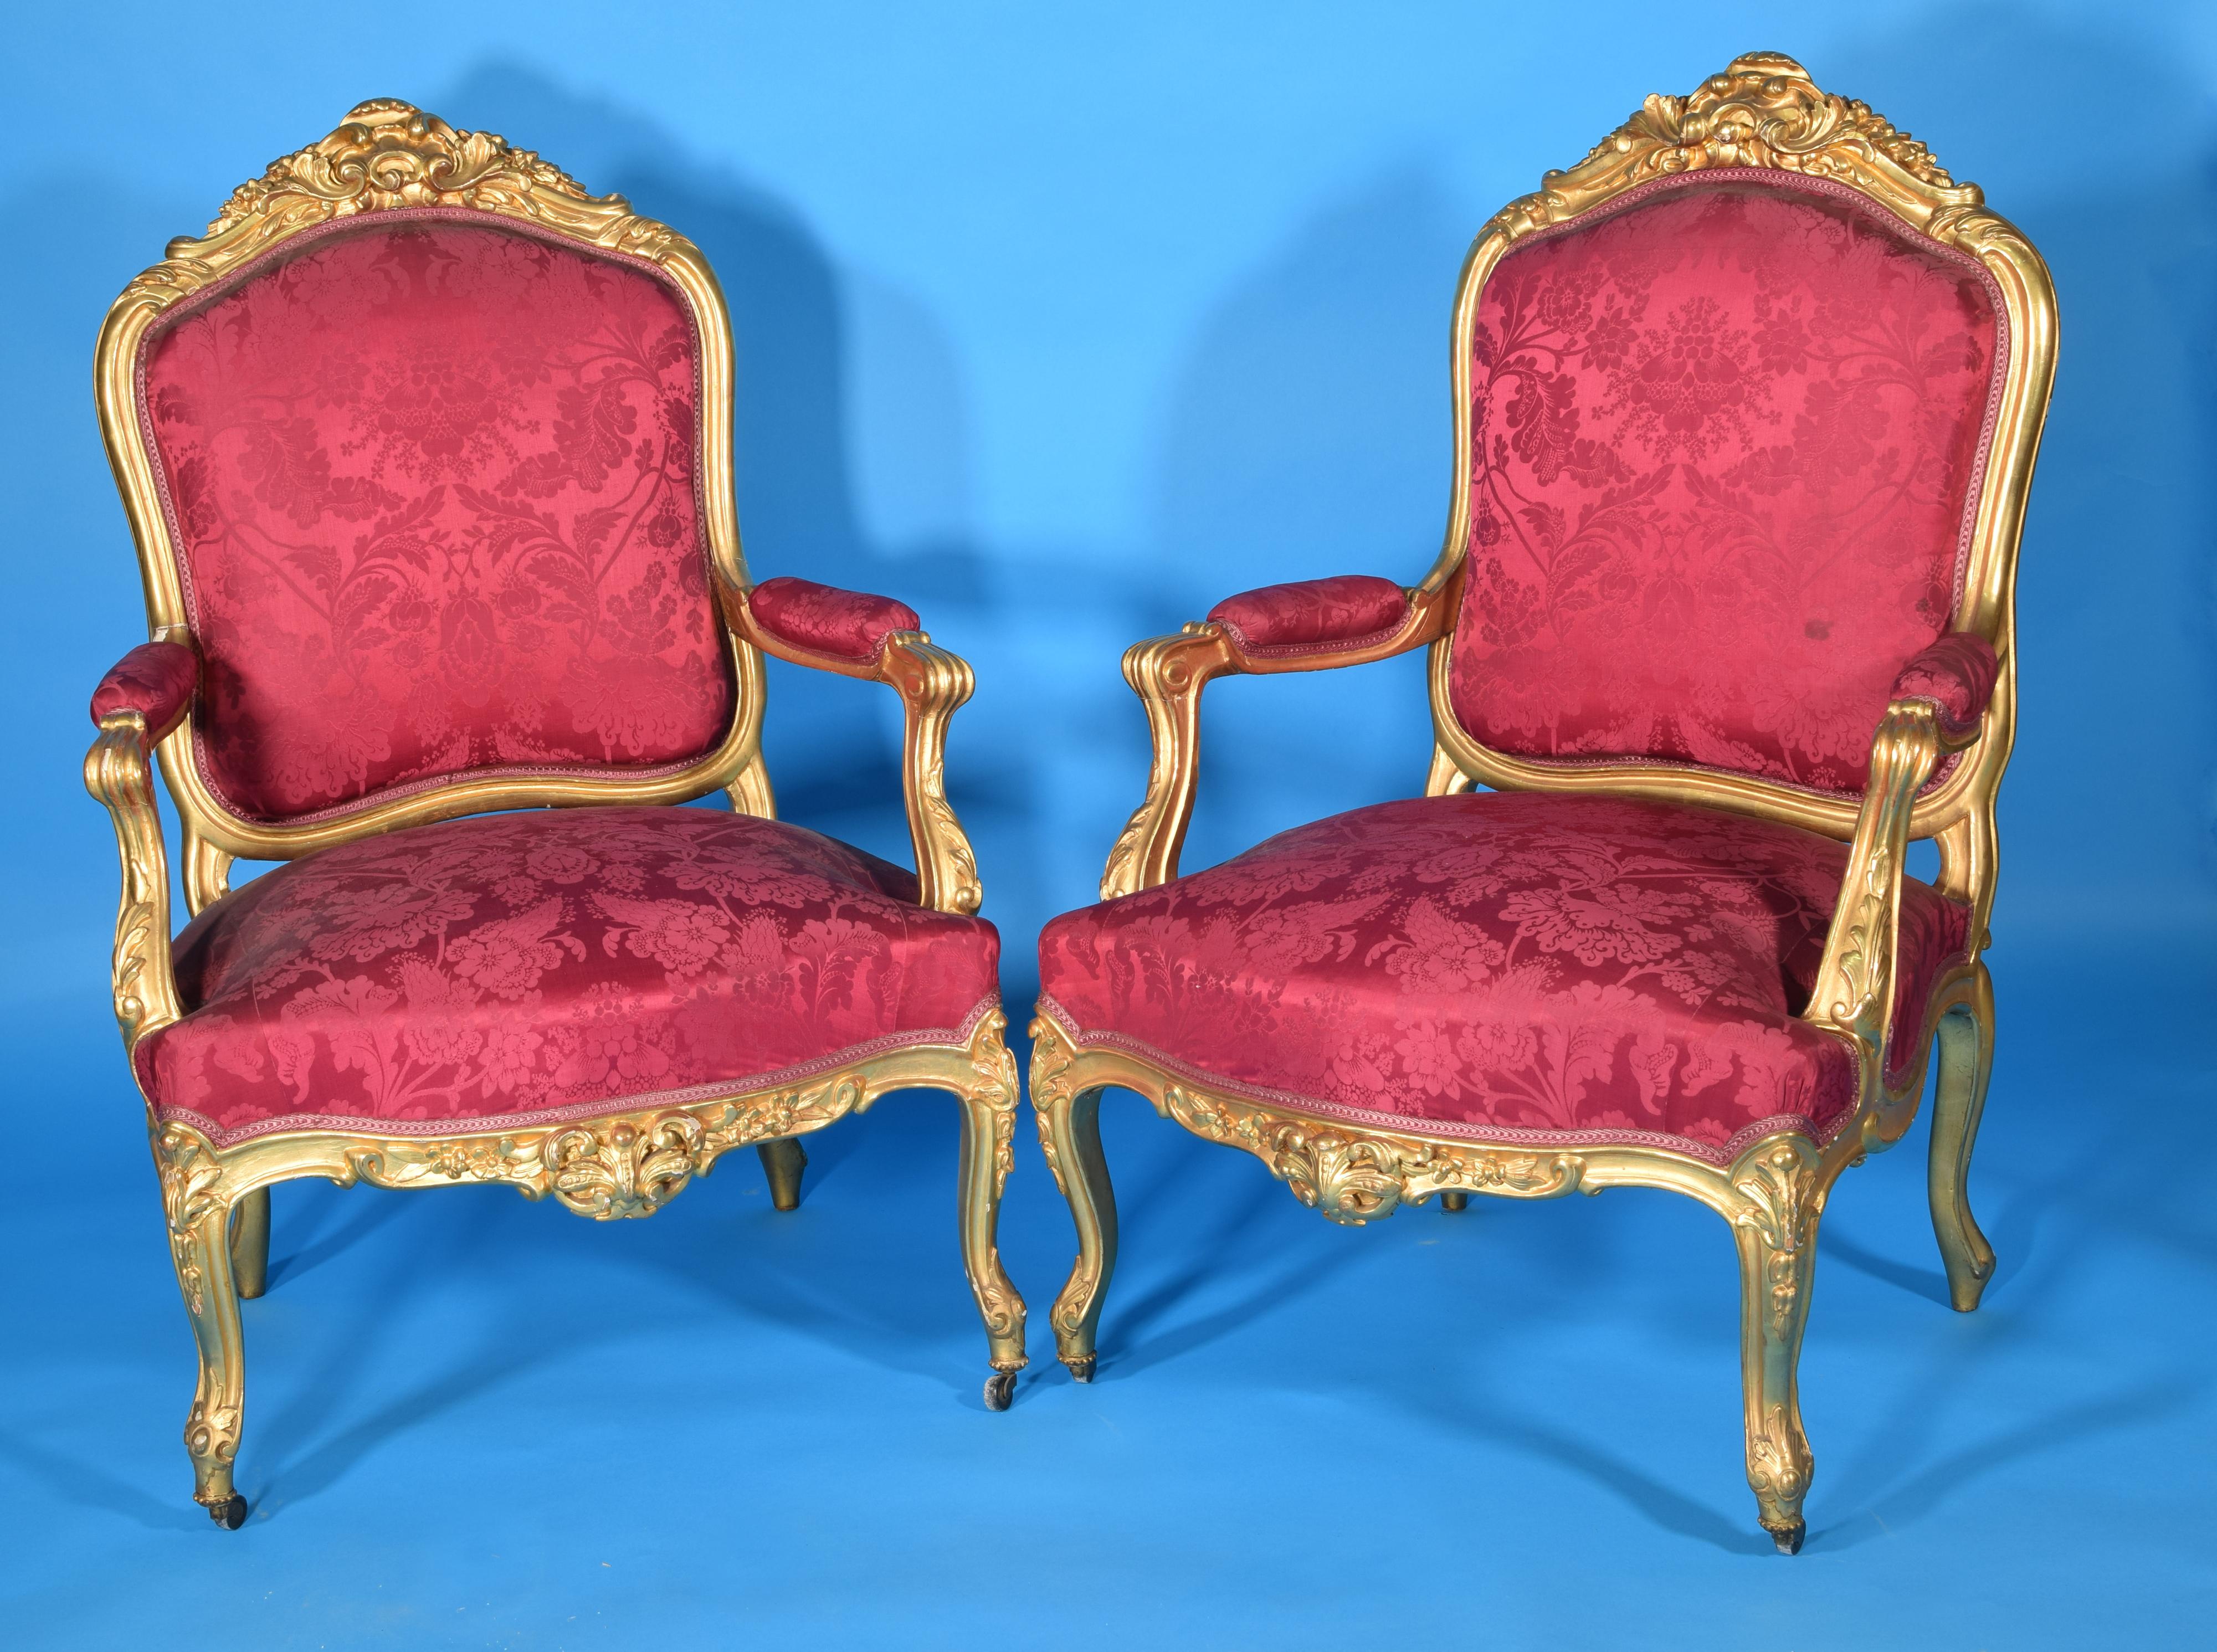 Neoclassical Set of Seats 'Chairs, Armchairs, Sofa', Wood, 19th Century